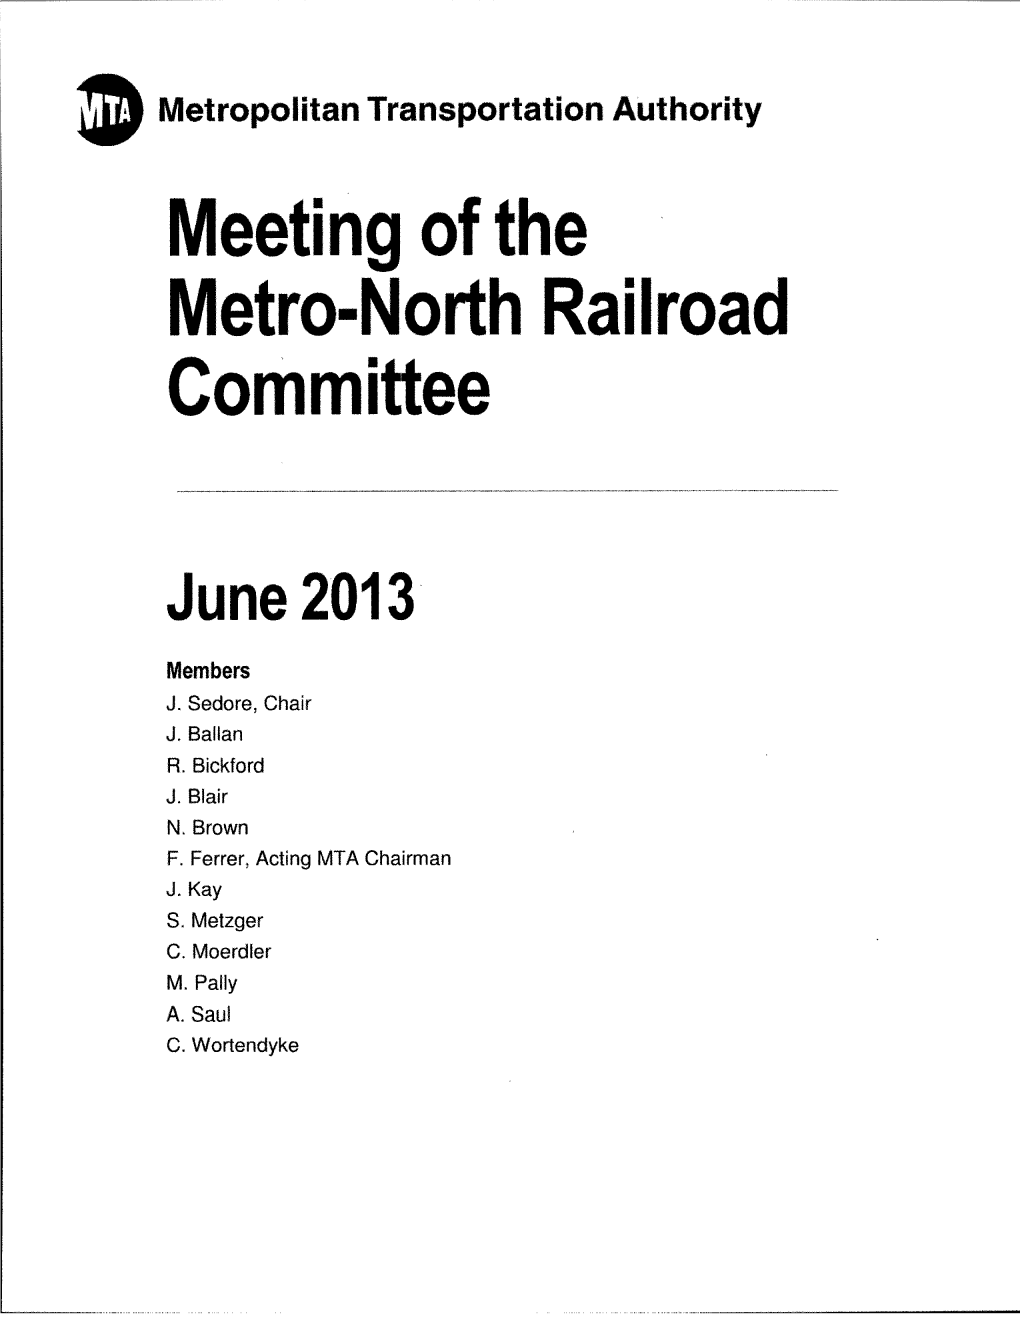 Meeting of the Metro-North Railroad Committee